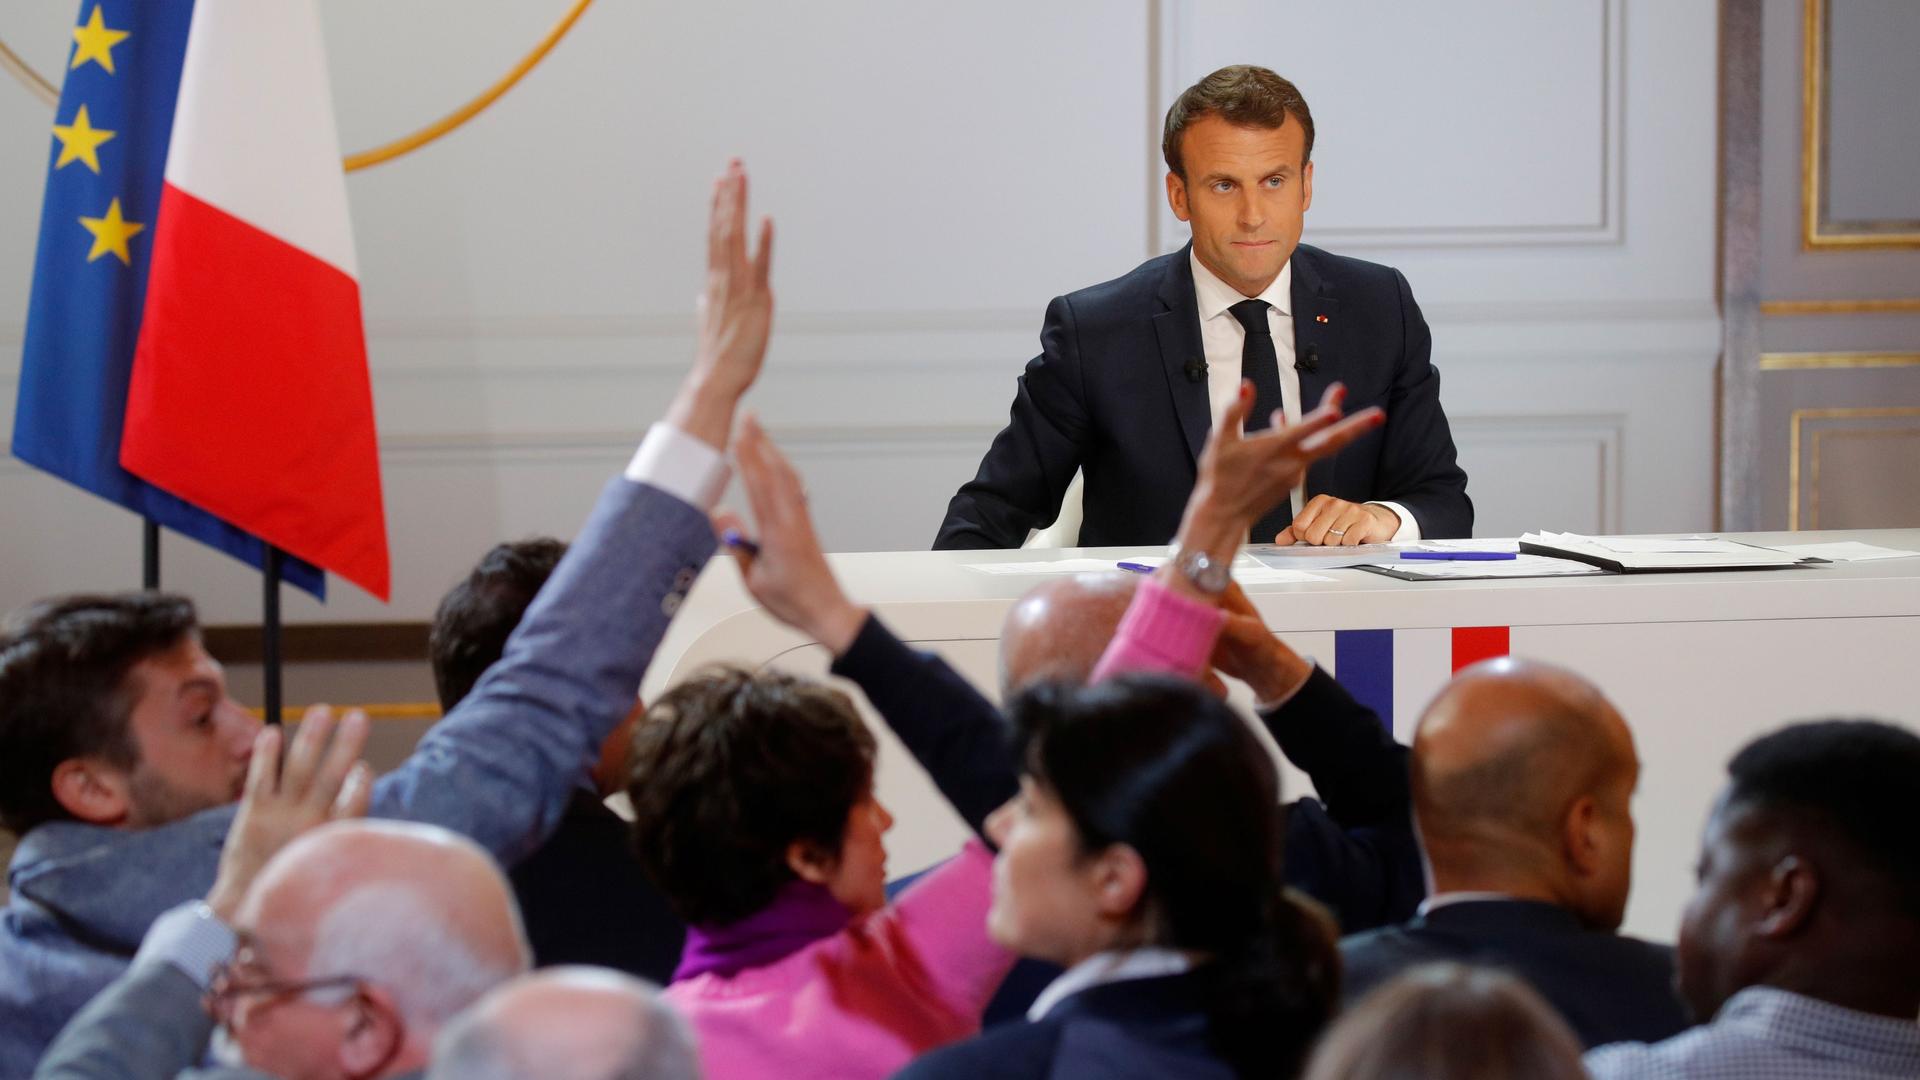 Macron is at the front of a room and hands of journalists are in the air